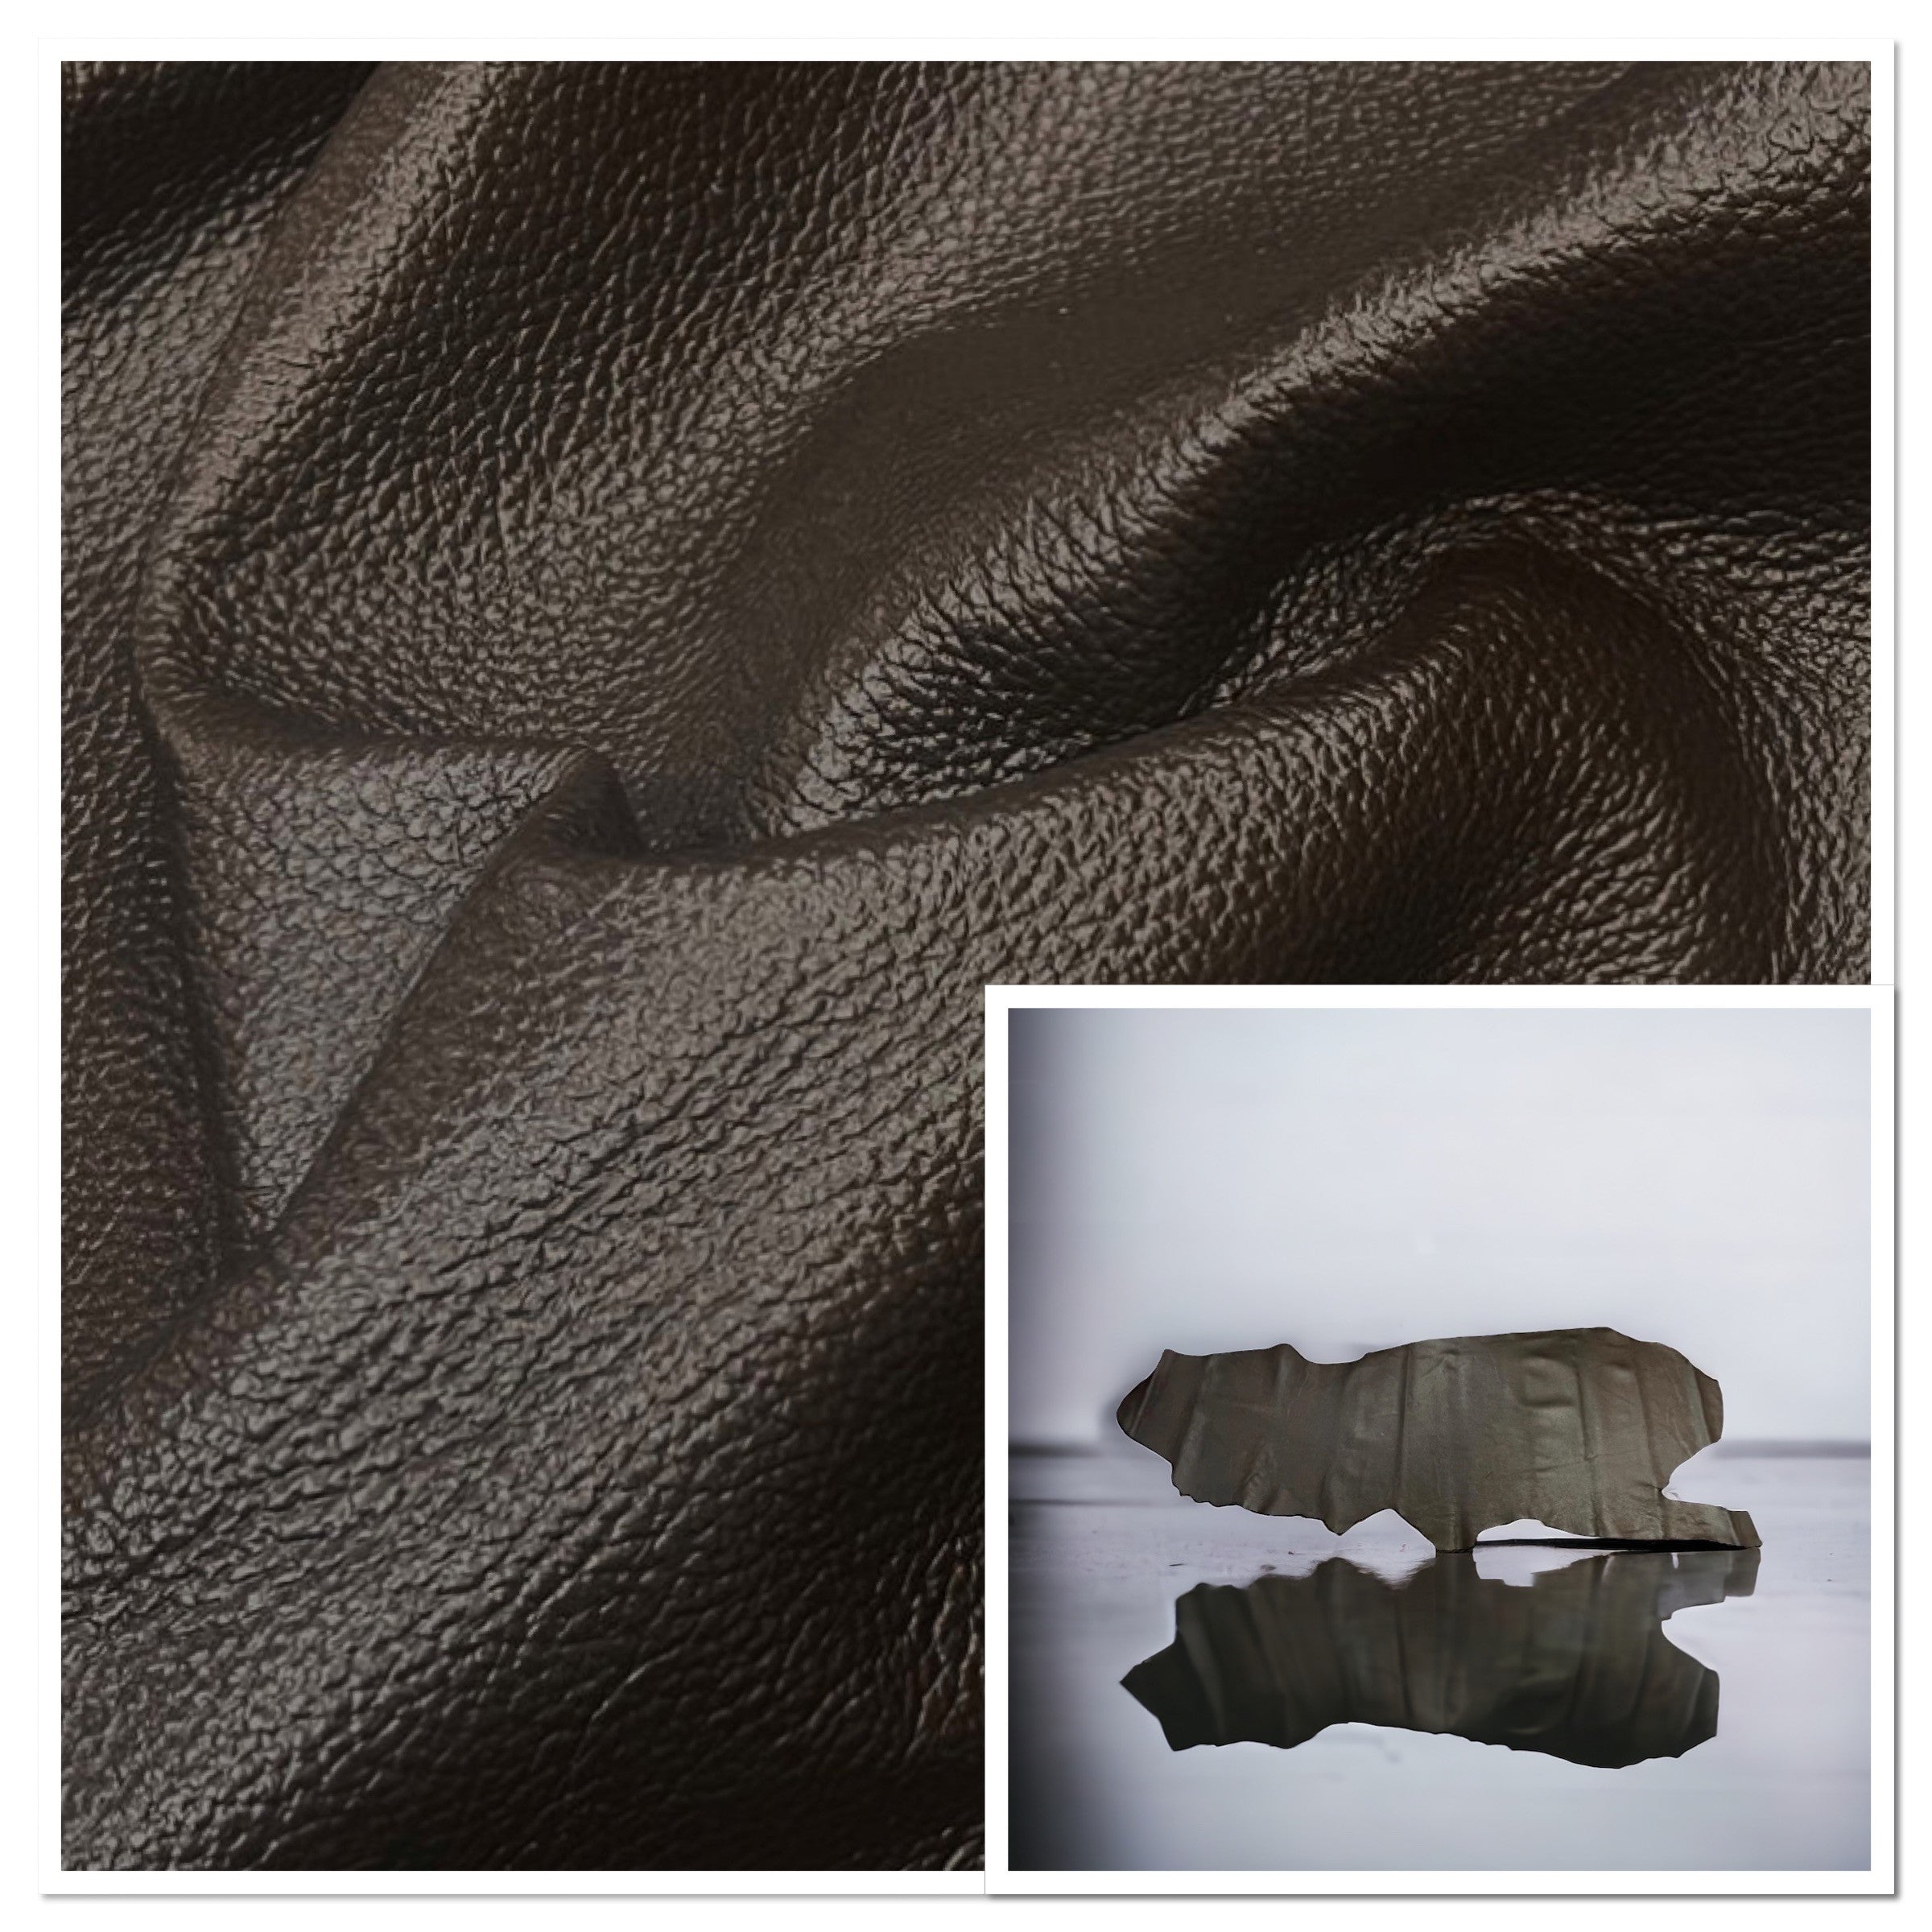 Cow Floater: Dark Brown Small Leather Cow Side, 1.2-1.4mm (Ex Pittards Stock)